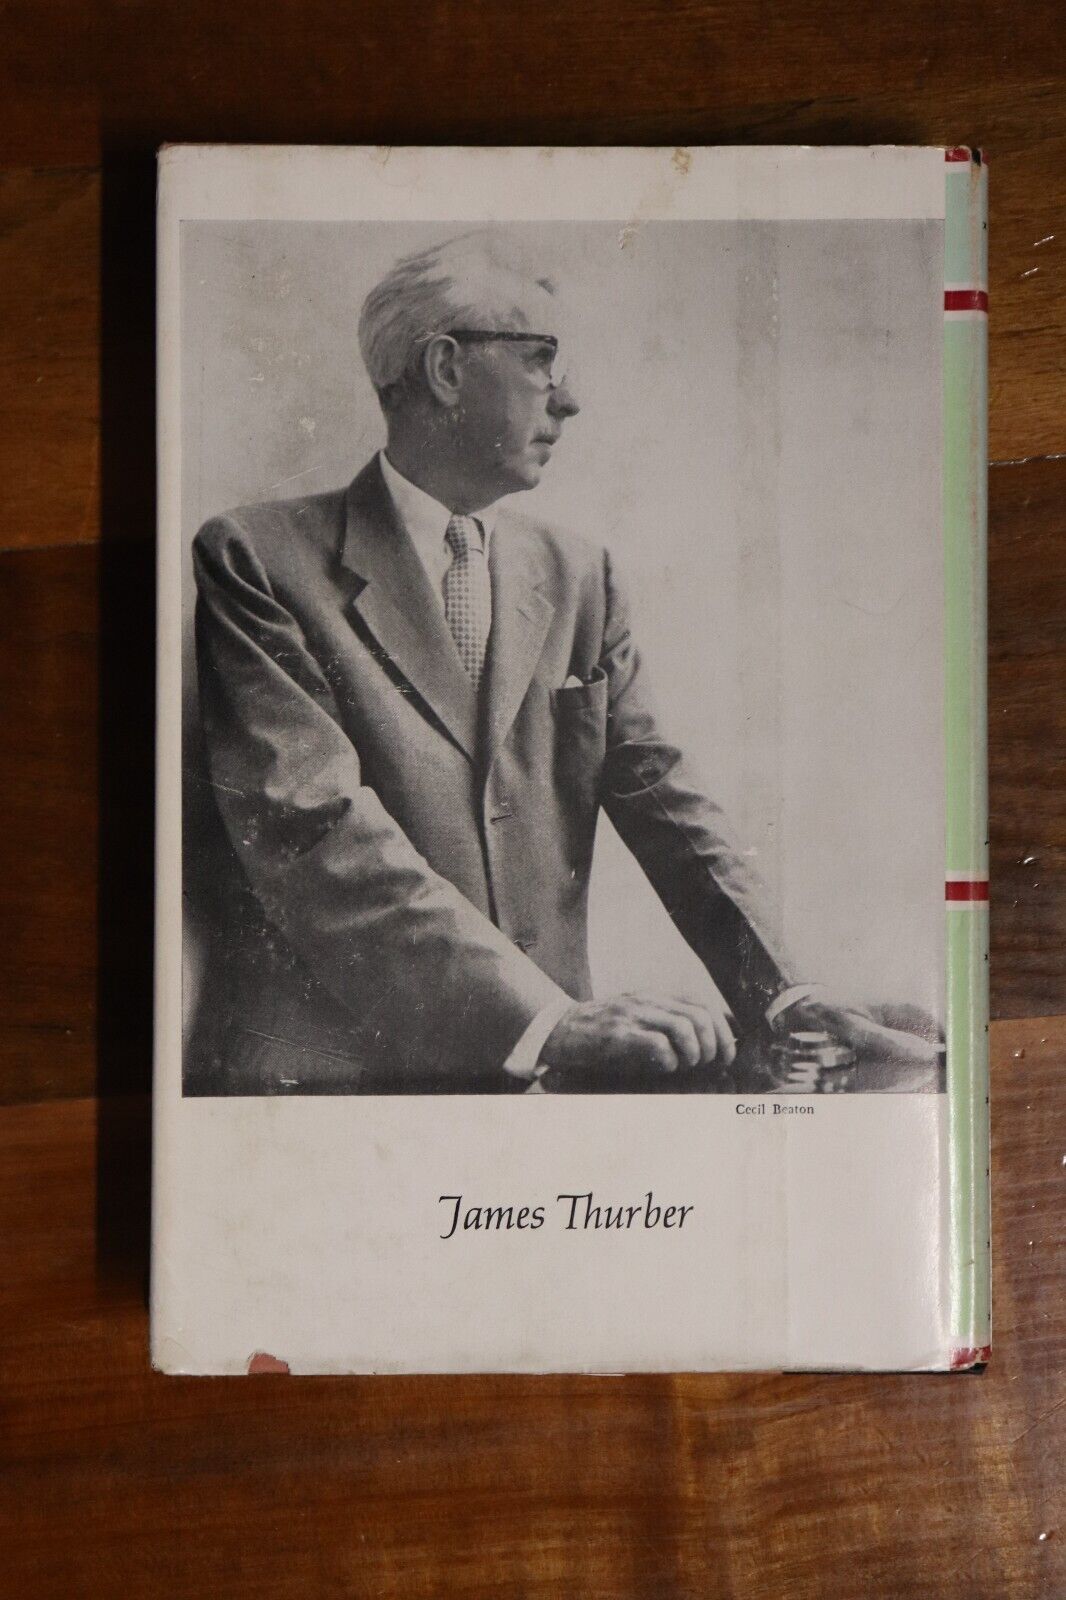 The Years With Ross by J Thurber - 1959 - New Yorker Biography Book